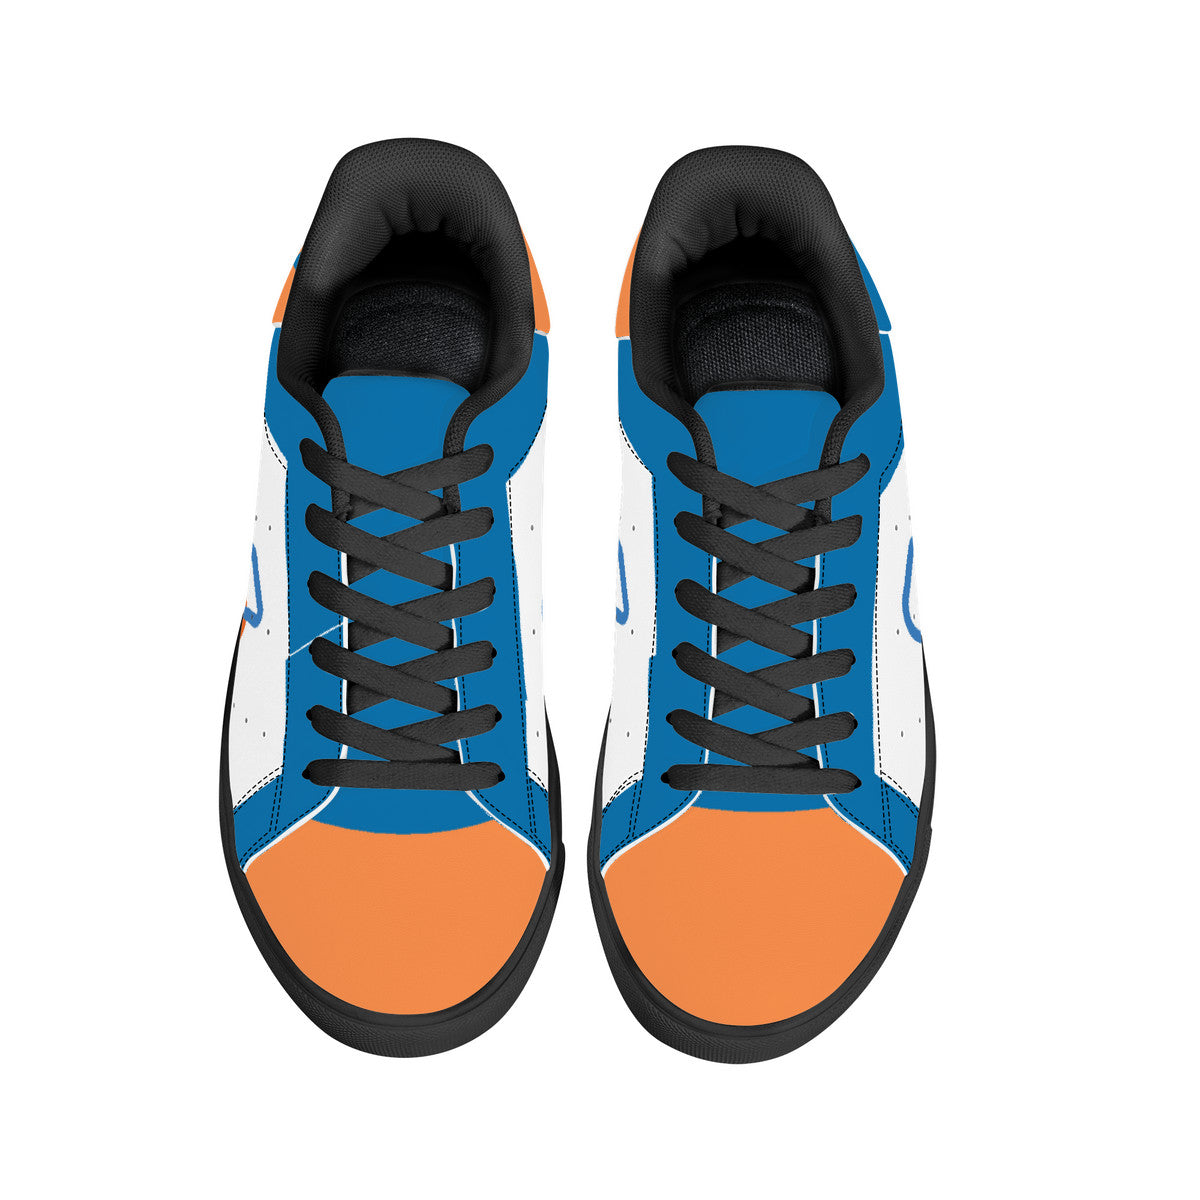 Low-Top Synthetic Leather Sneakers - Custom Designed for Spherion, Inc.